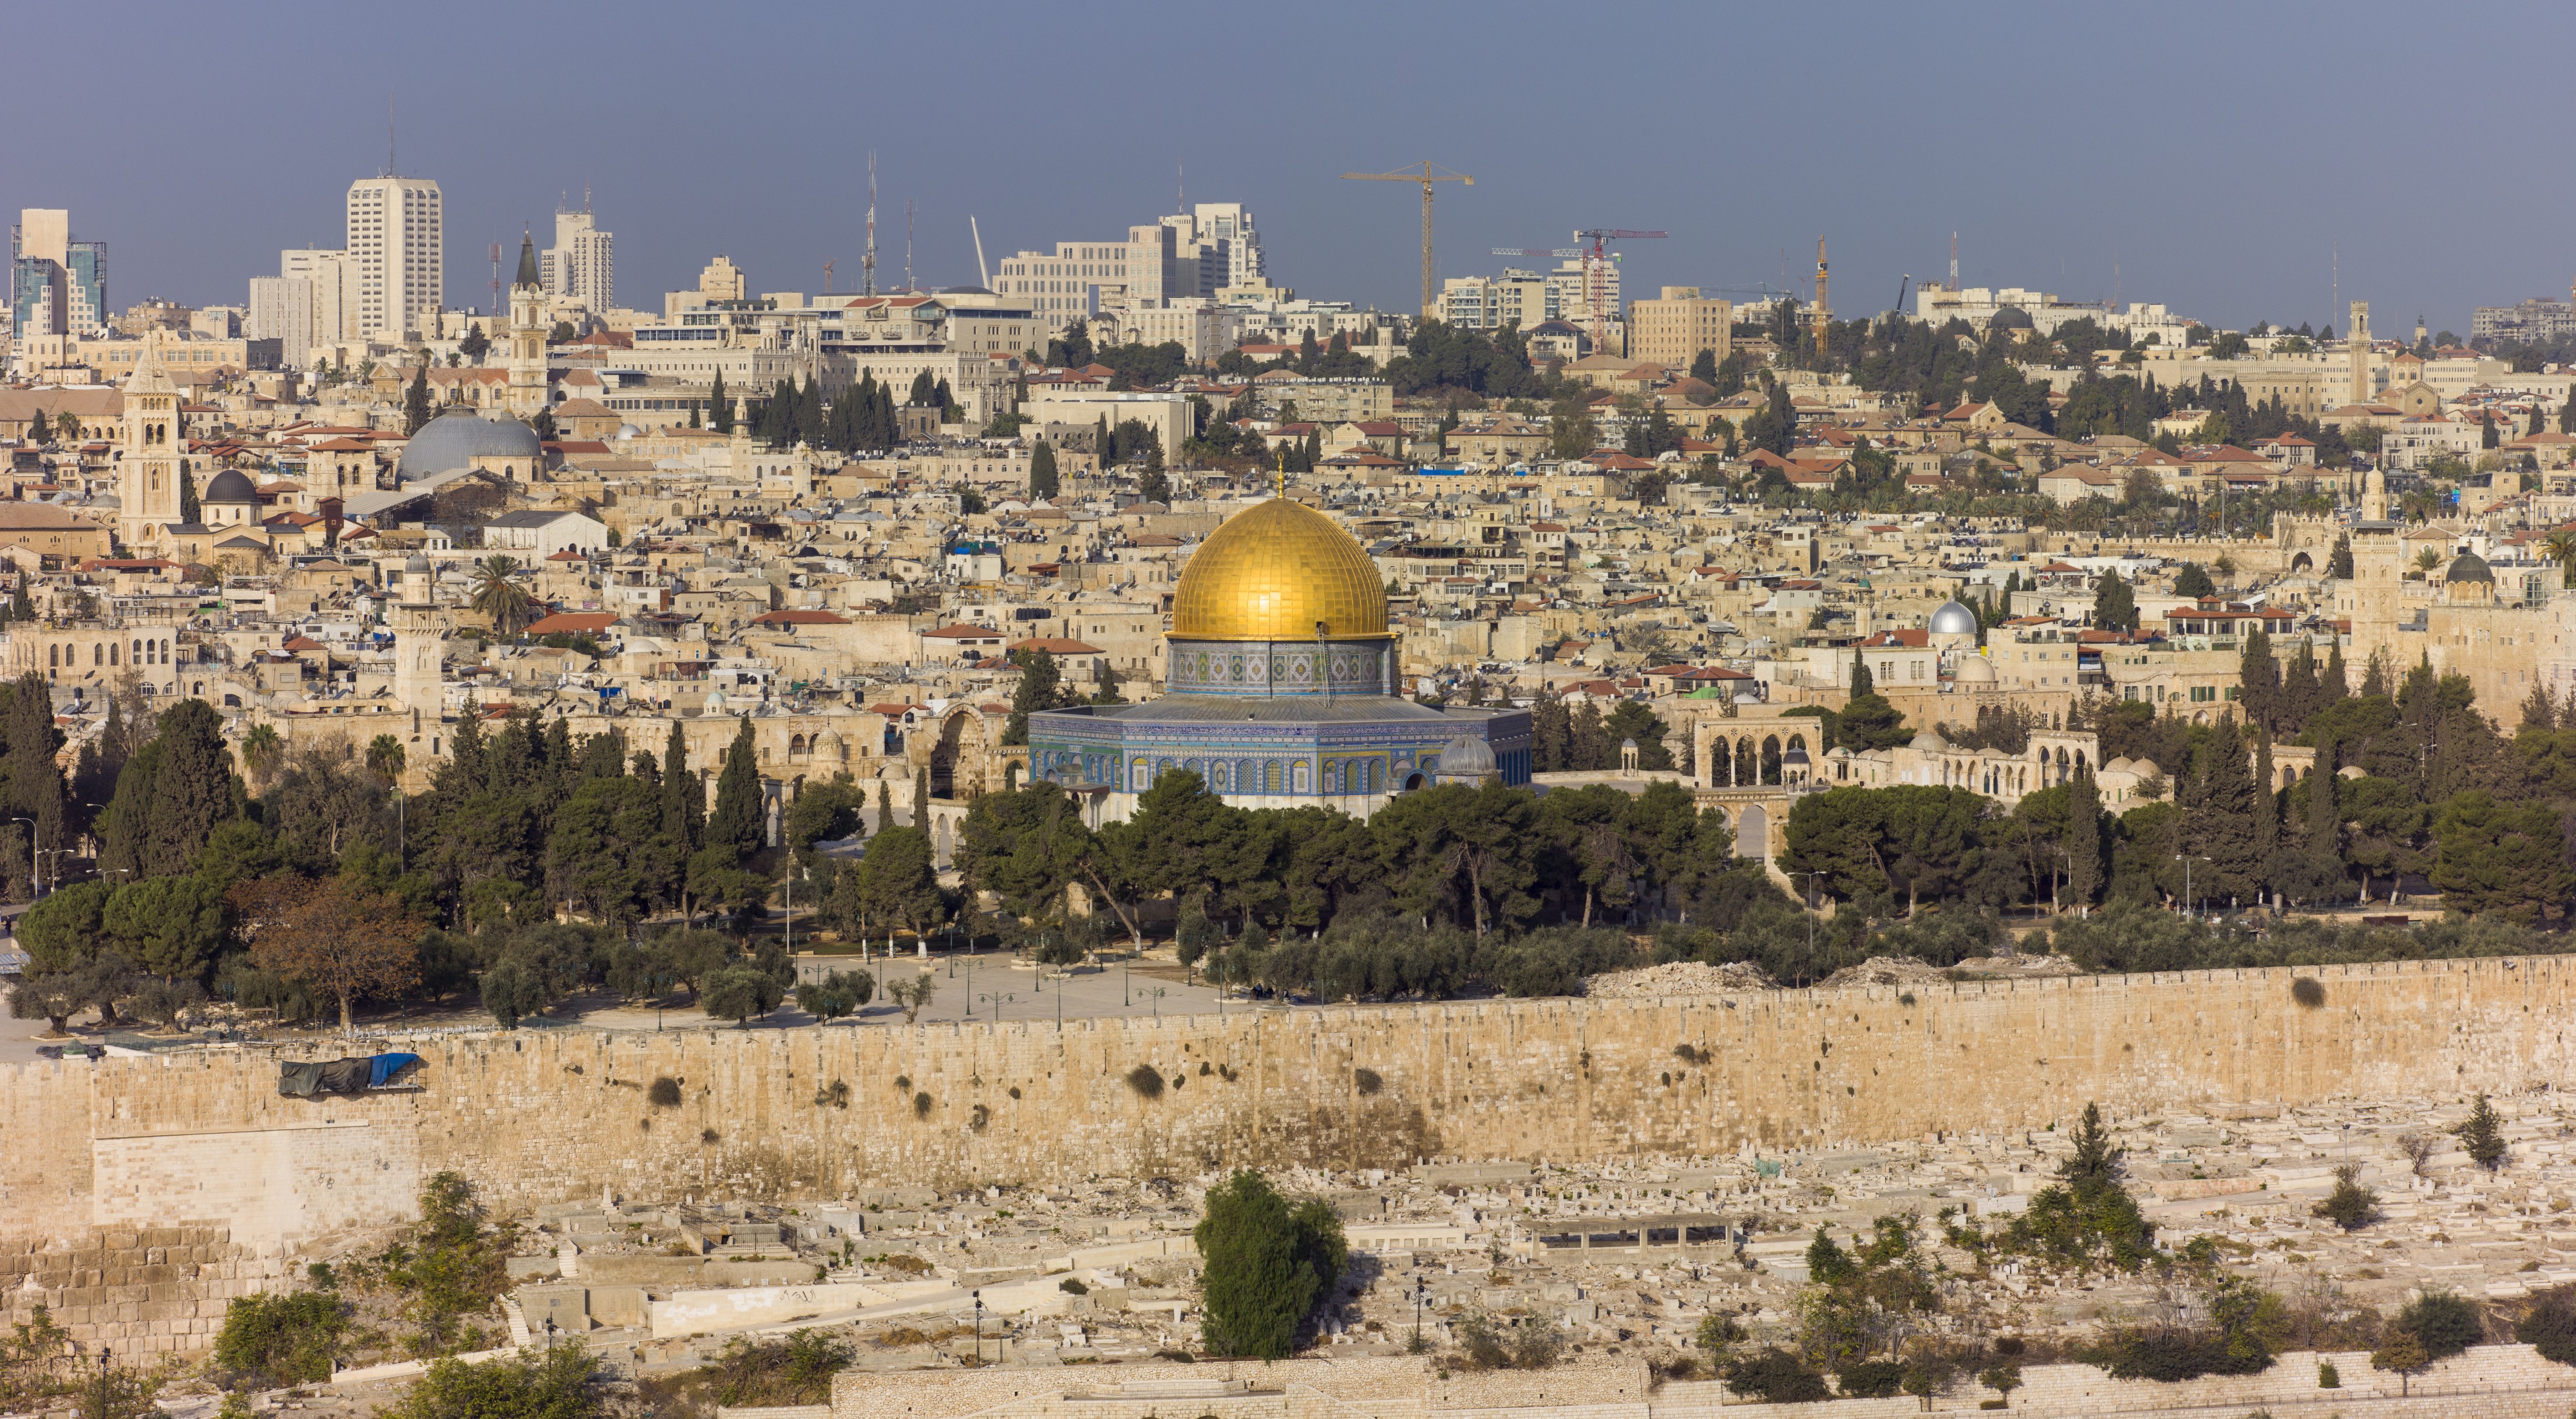 Israel-2013(2)-Jerusalem-View of the Dome of the Rock & Temple Mount 02